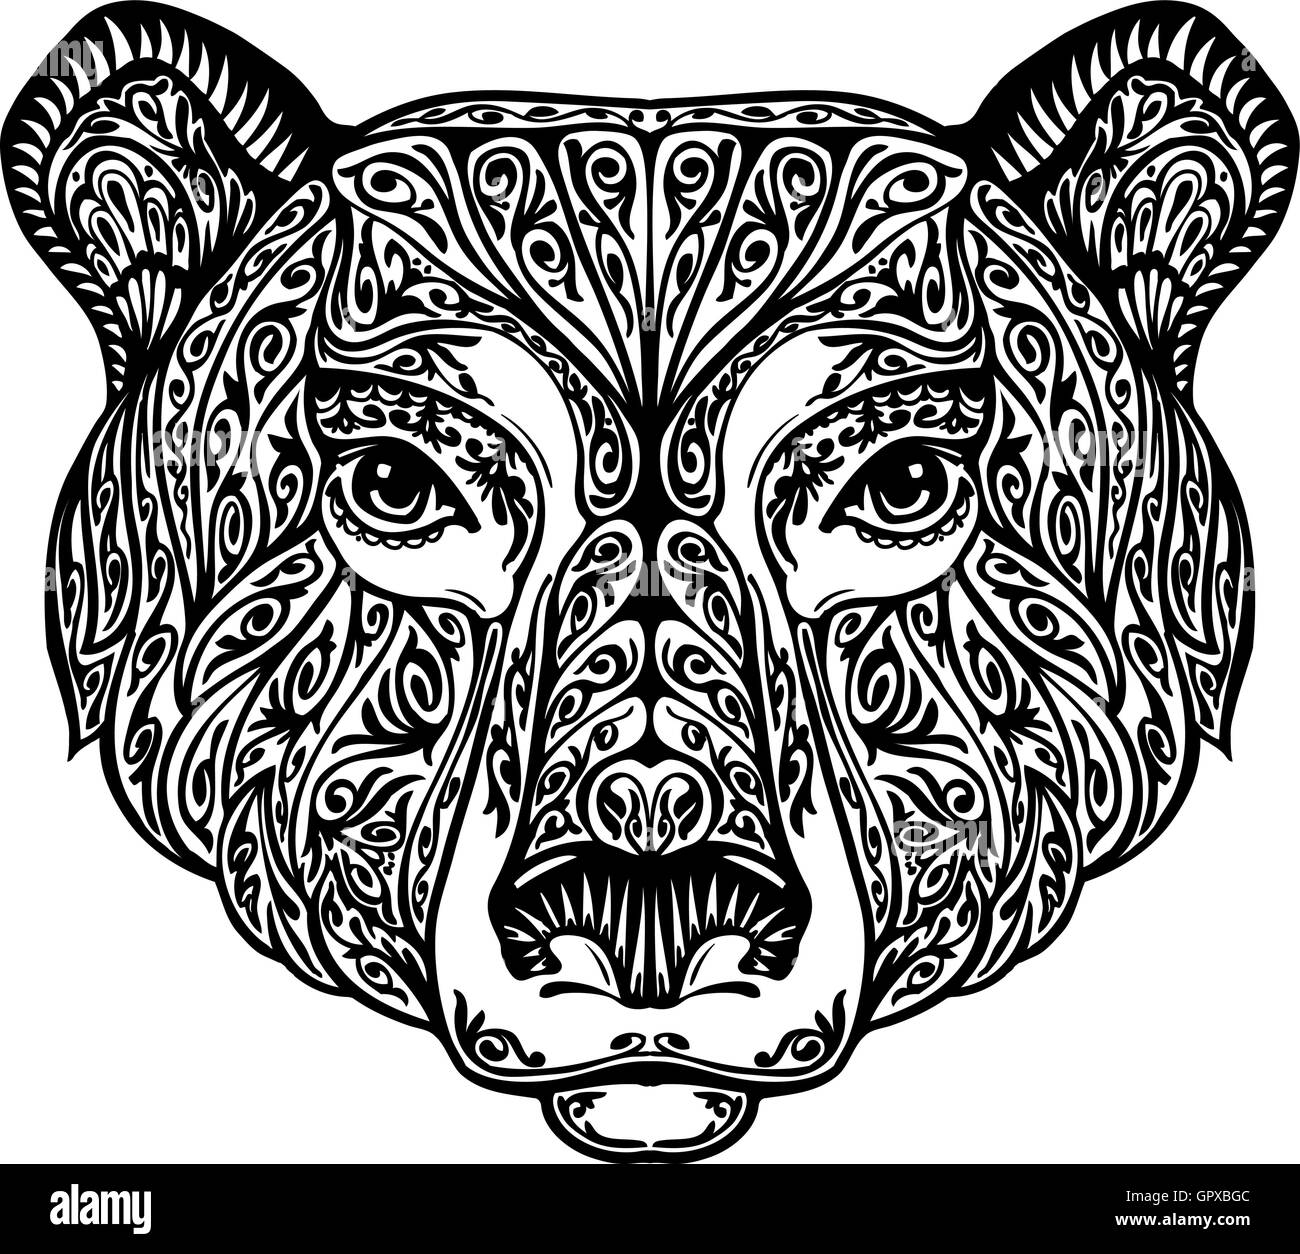 Bear, grizzly or animal painted tribal ethnic ornament. Hand drawn vector illustration with floral elements Stock Vector